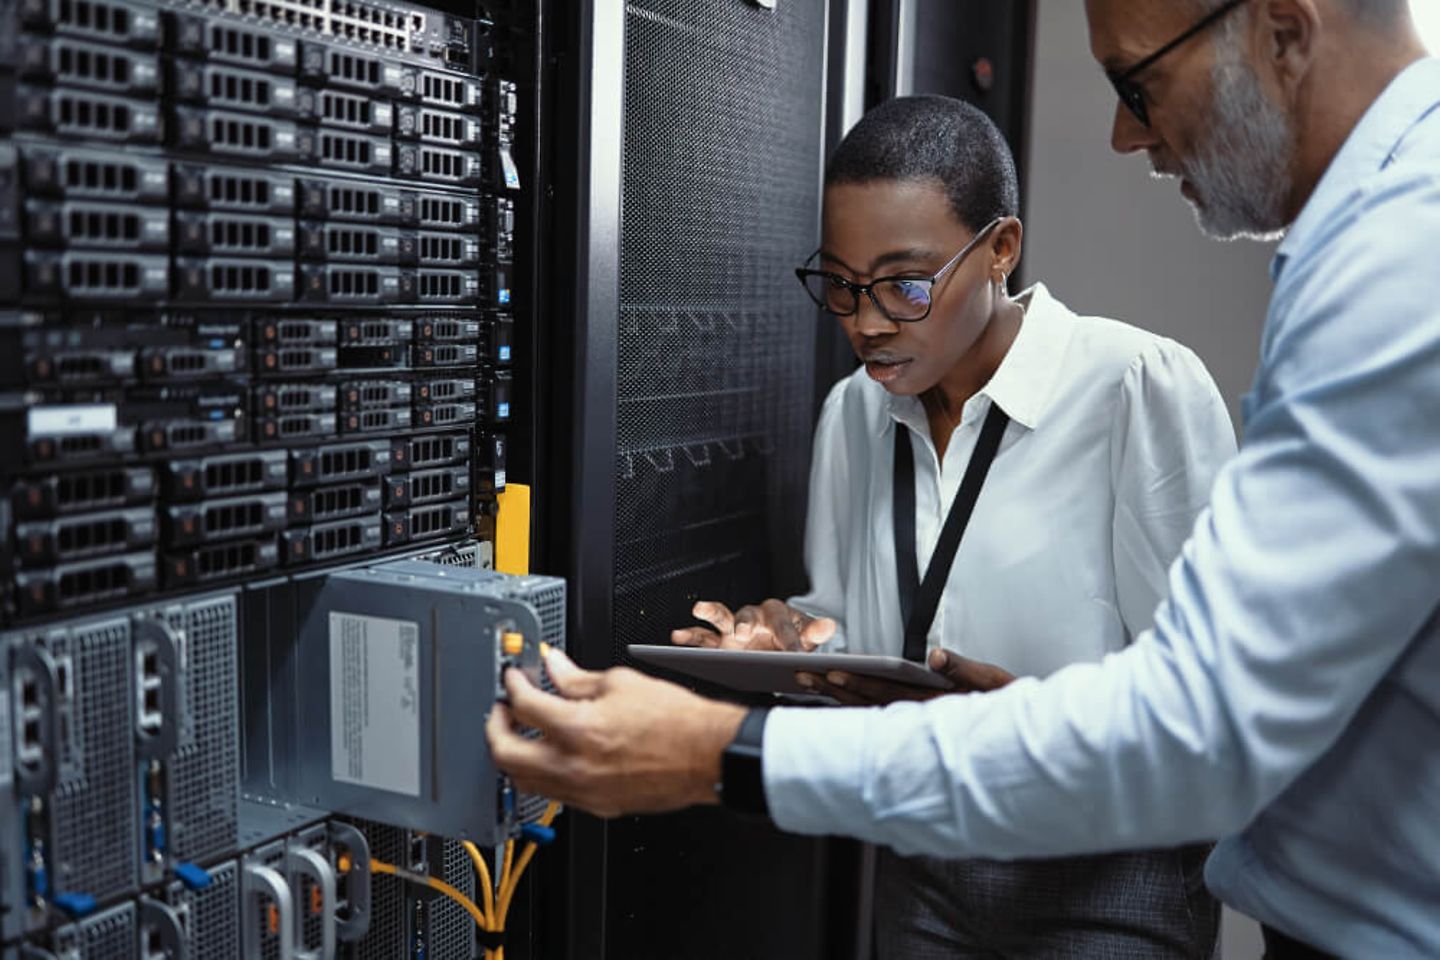 Two IT professionals working in a server room